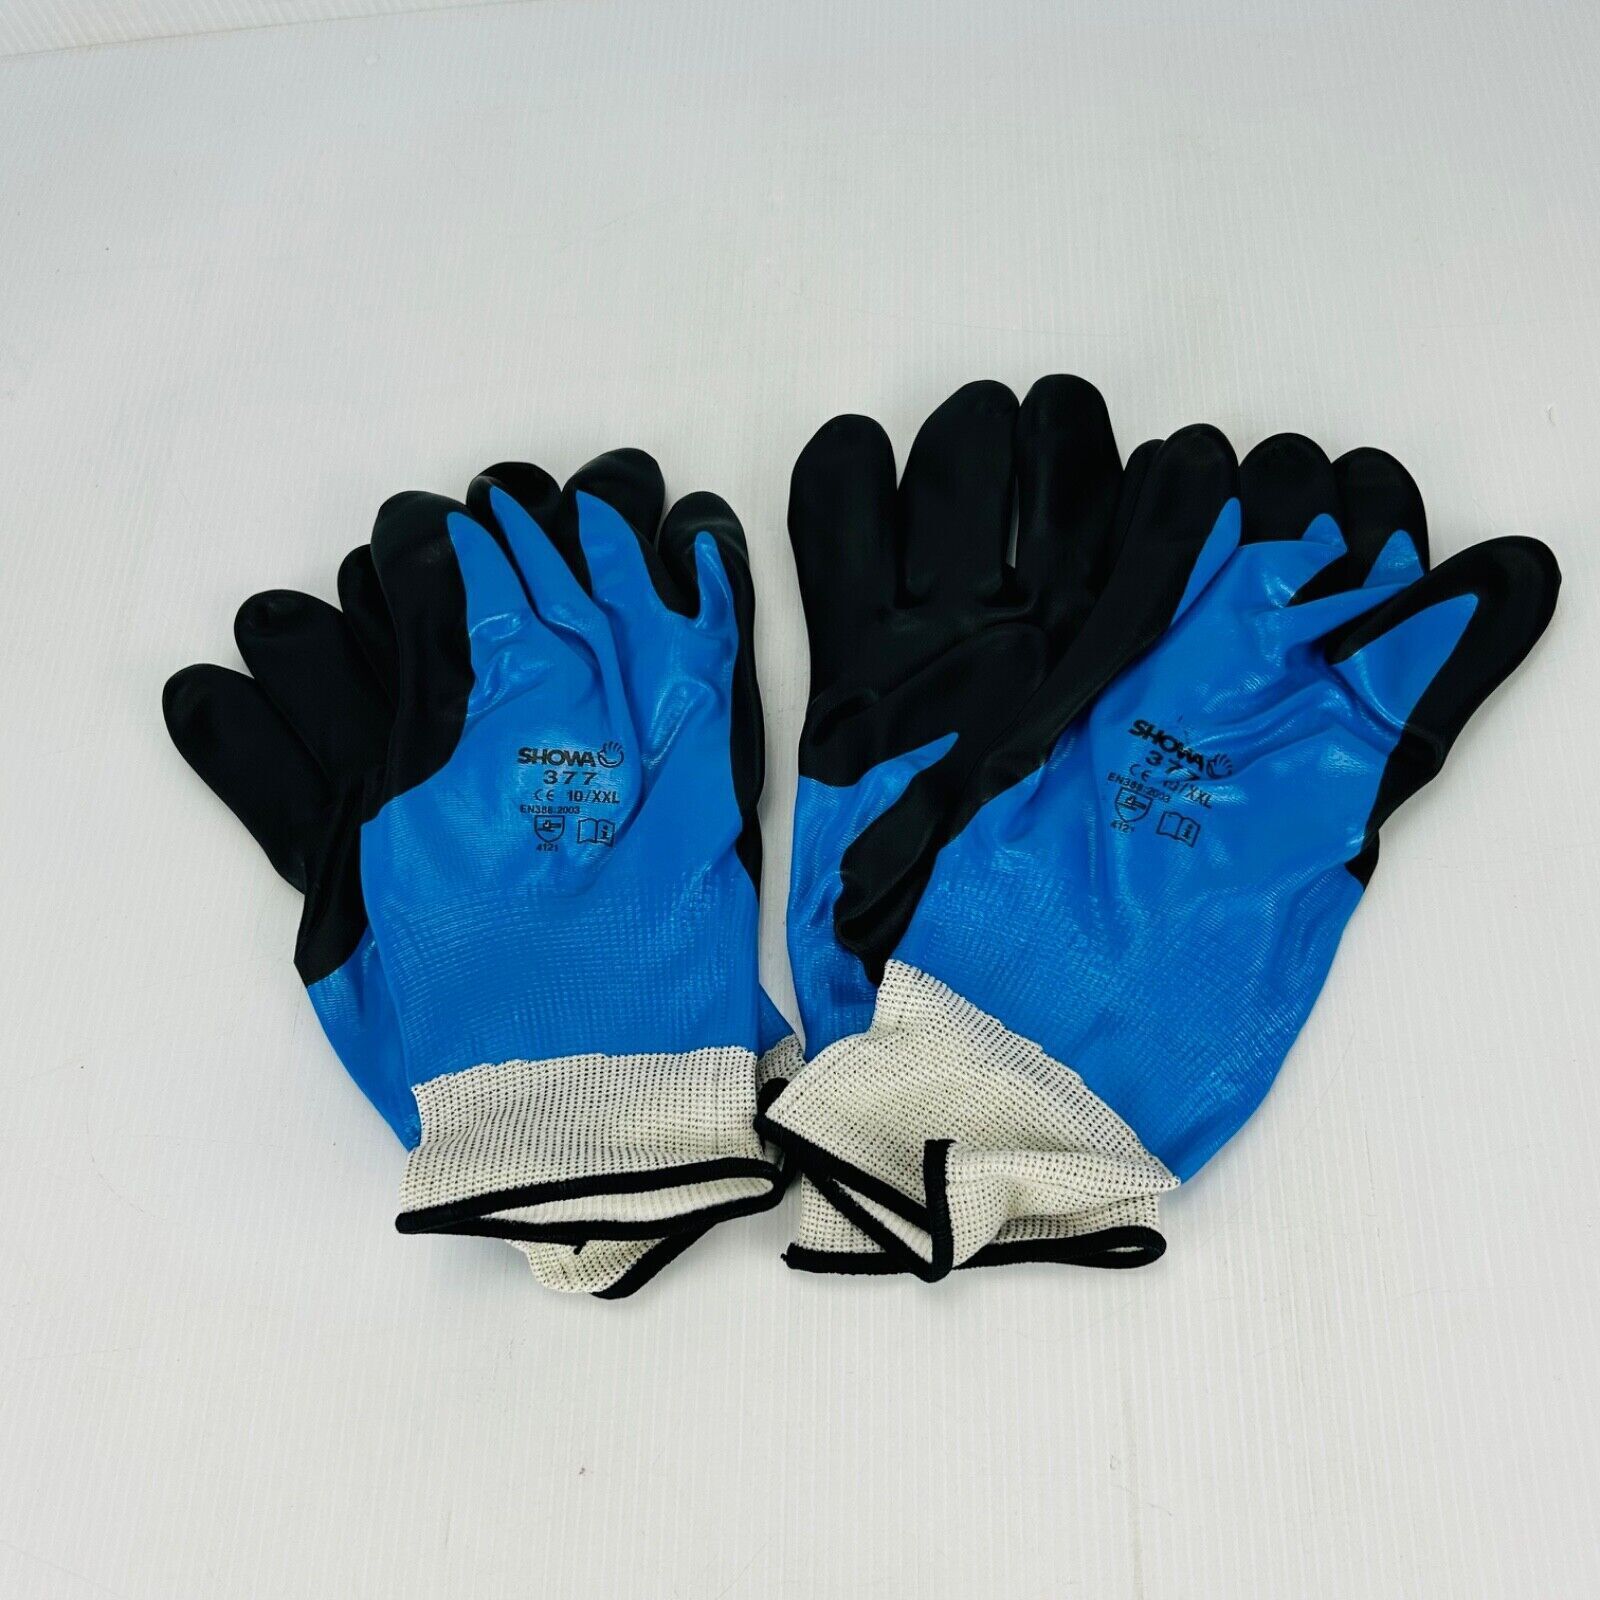 New Showa 377 Foam Nitrile Fully Coated Gloves 2XL Blue & Black Lot Of 2 Pairs